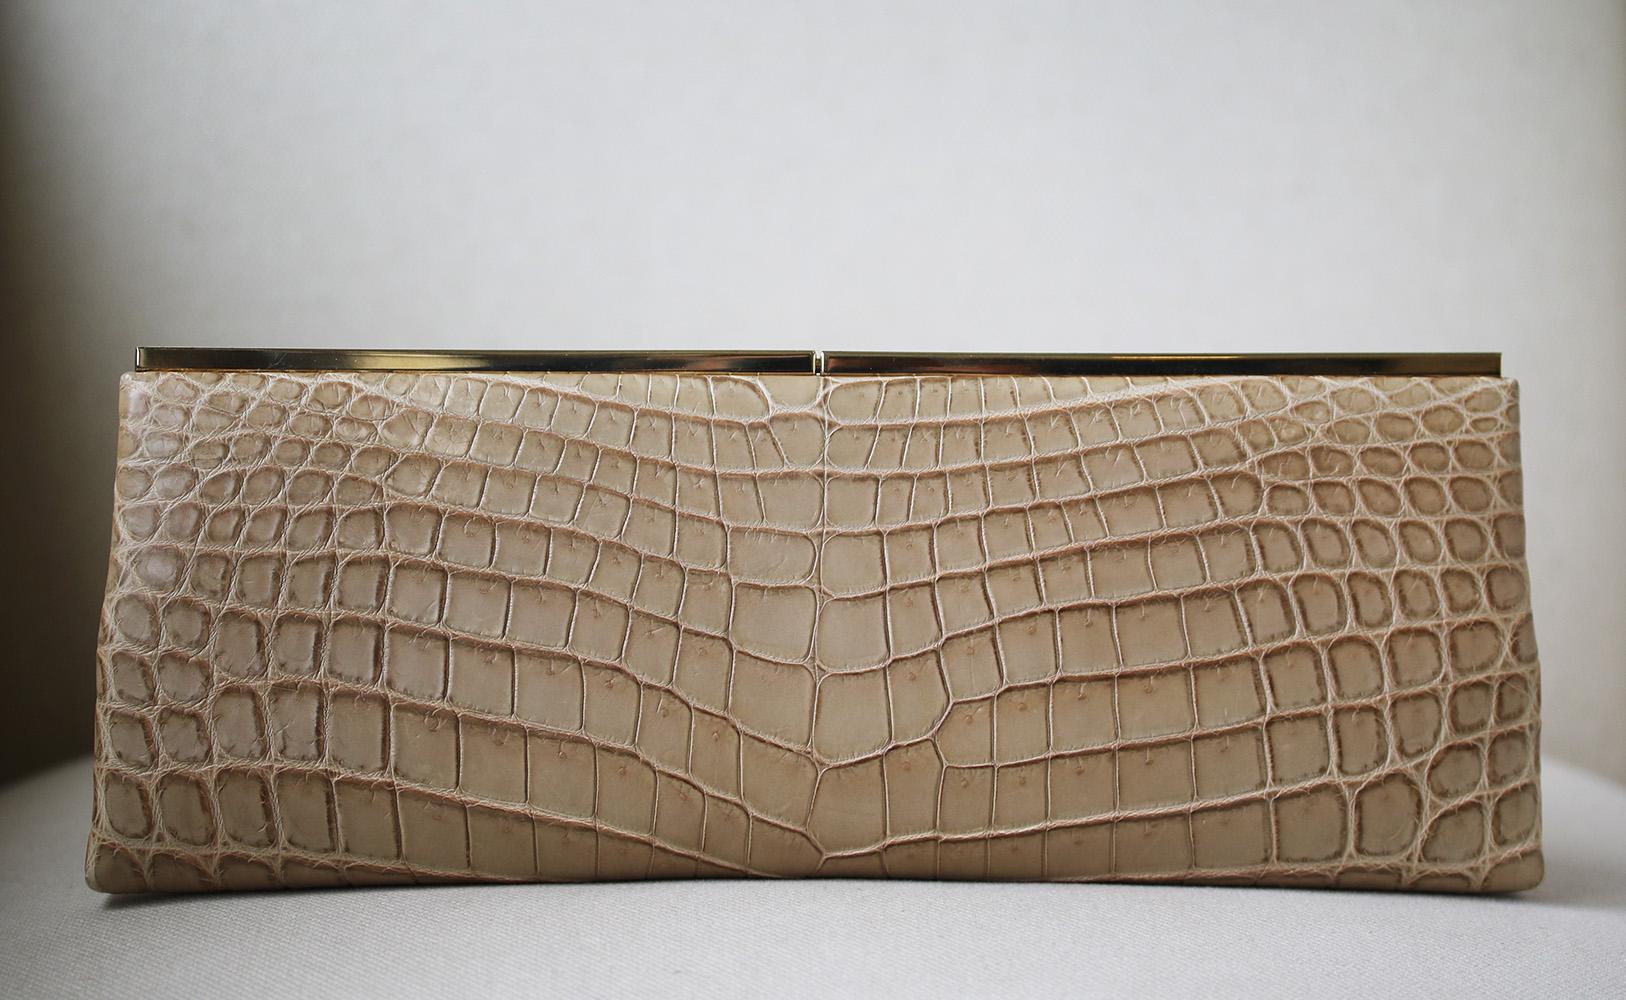 Beige croc-effect leather clutch from Jimmy Choo featuring a rectangular shape, a gold-tone opening, a press clasp fastening, an interior patch pocket and a cream leather lining. Does not come with dustbag.

Dimensions: 13 x 5 x 1 inches

Condition: